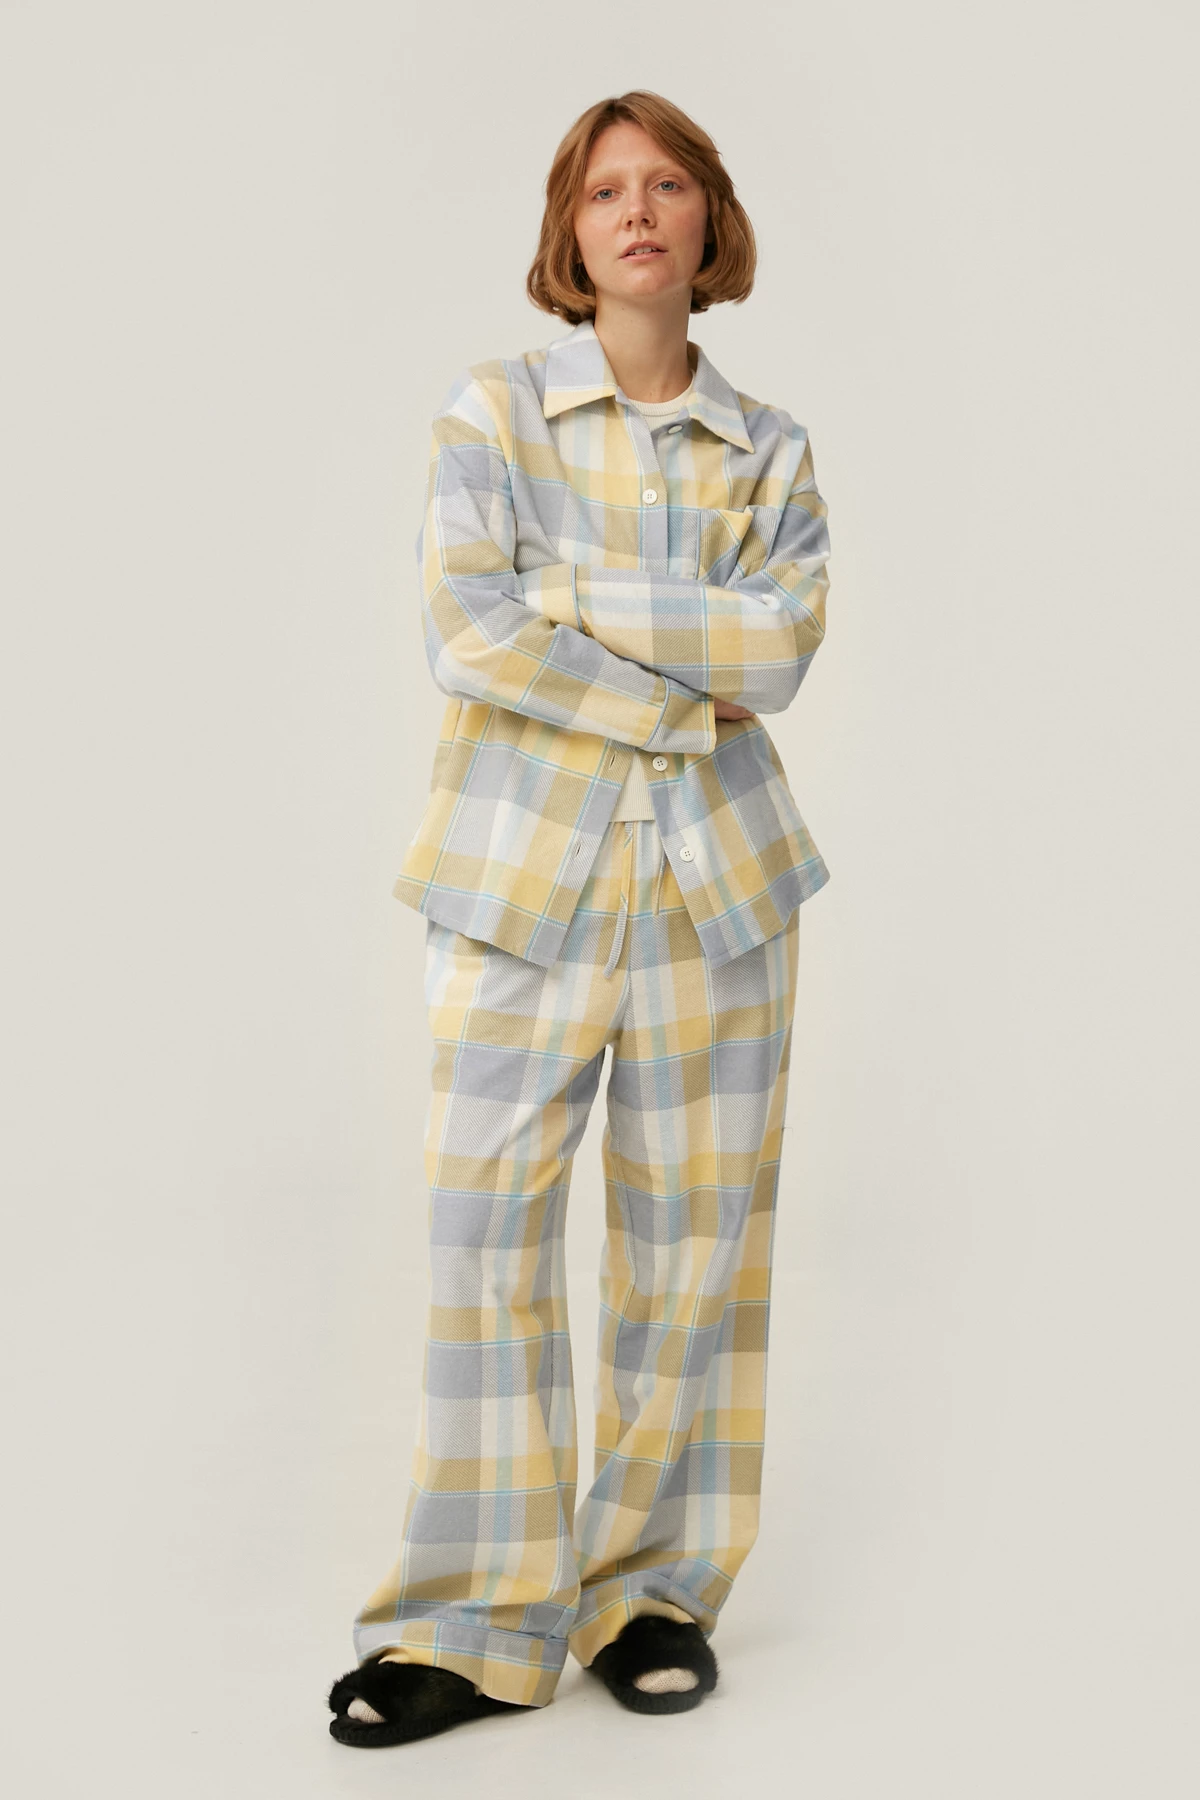 Pajama flanelette shirt in yellow and blue check, photo 1